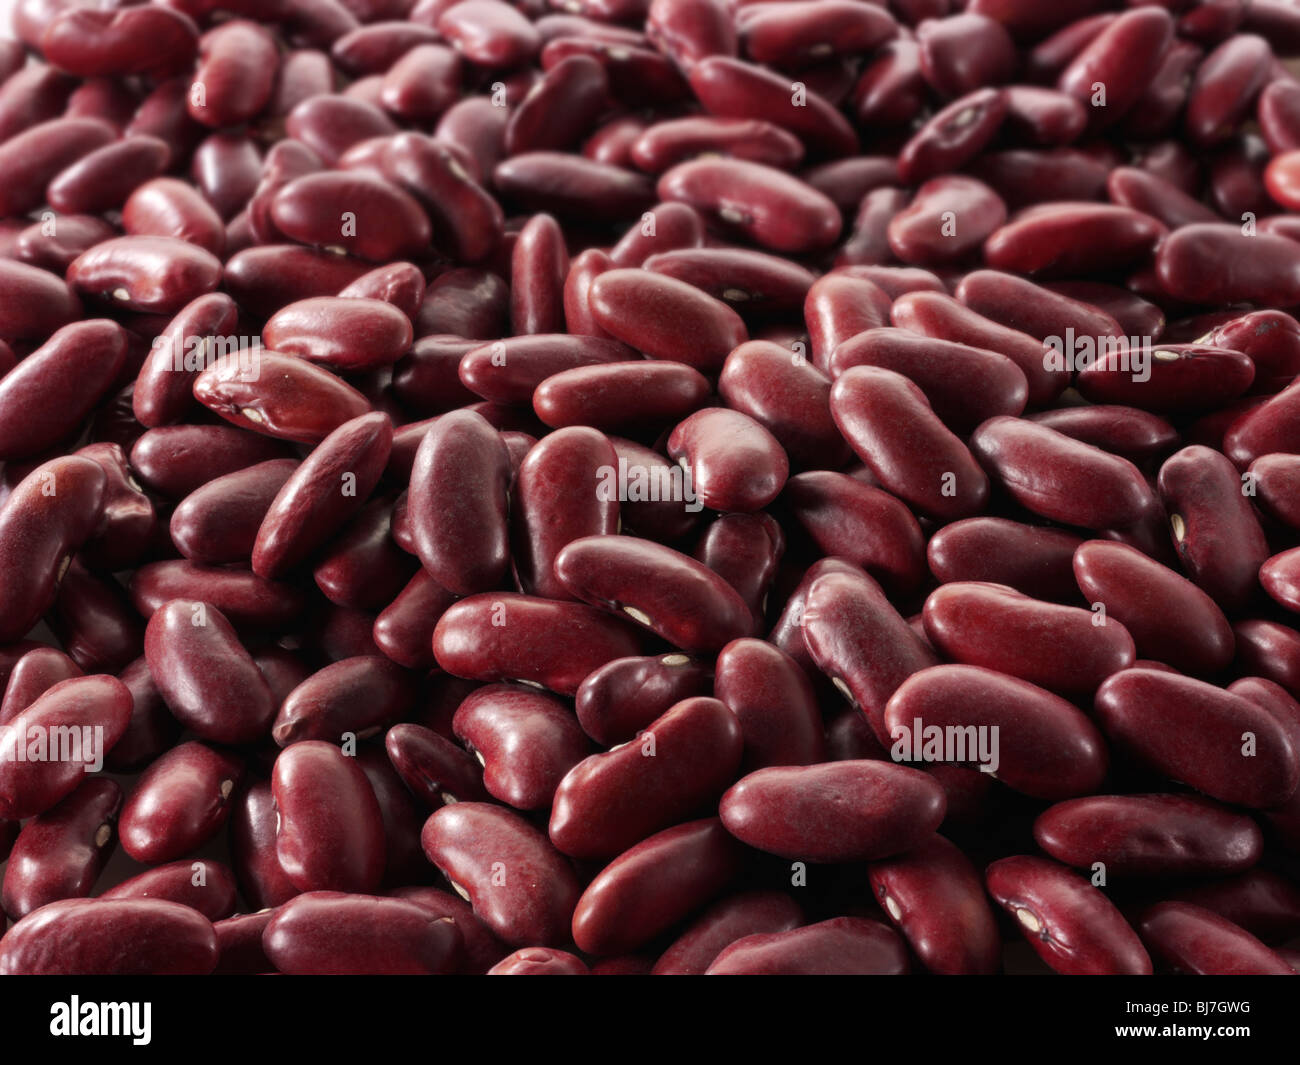 Whole red kidney beans - close up full frame top shot  (Phaseolus vulgaris) Stock Photo